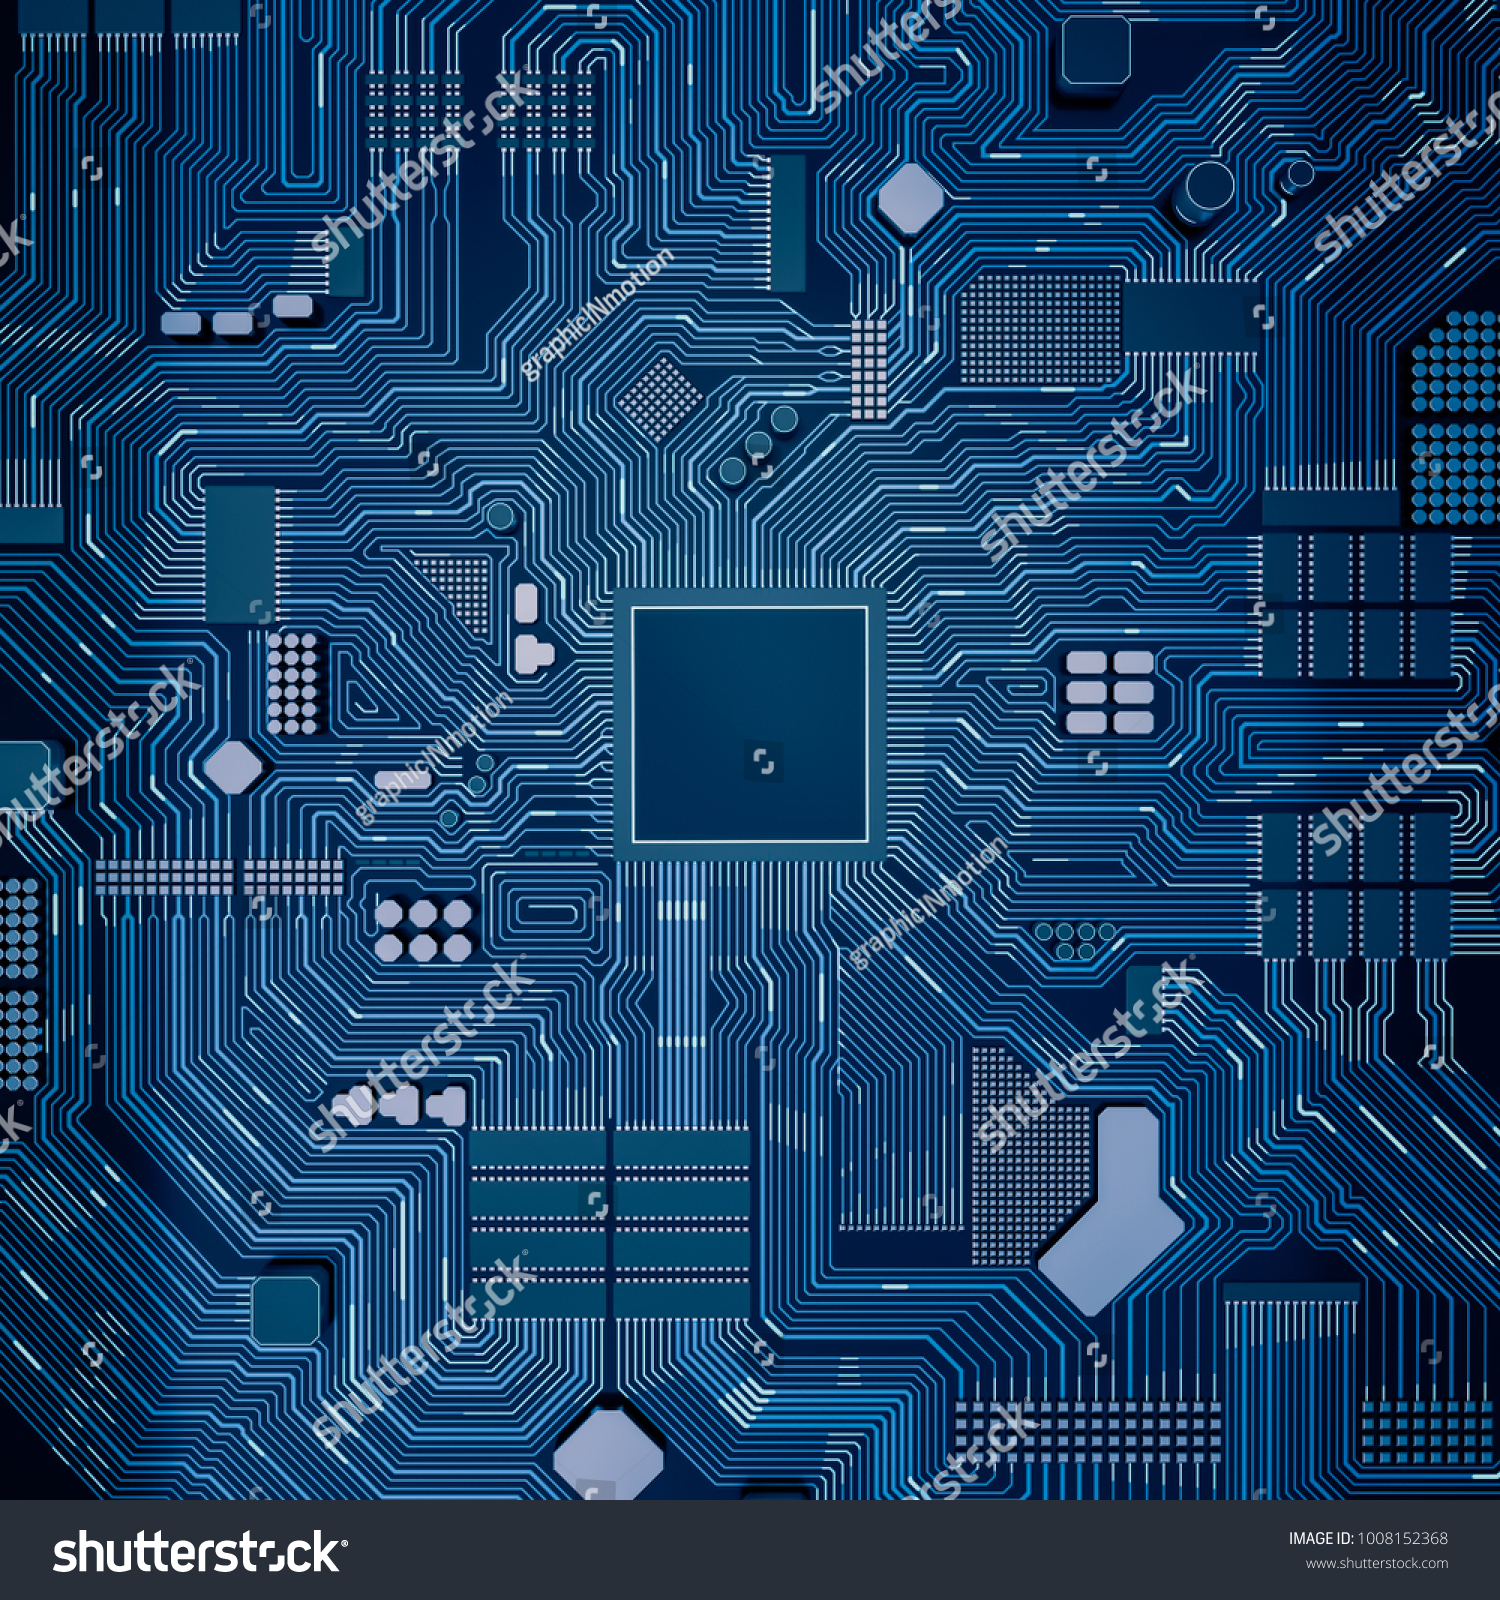 Cpu Chip On Motherboard Abstract 3d Stock Illustration 1008152368 ...